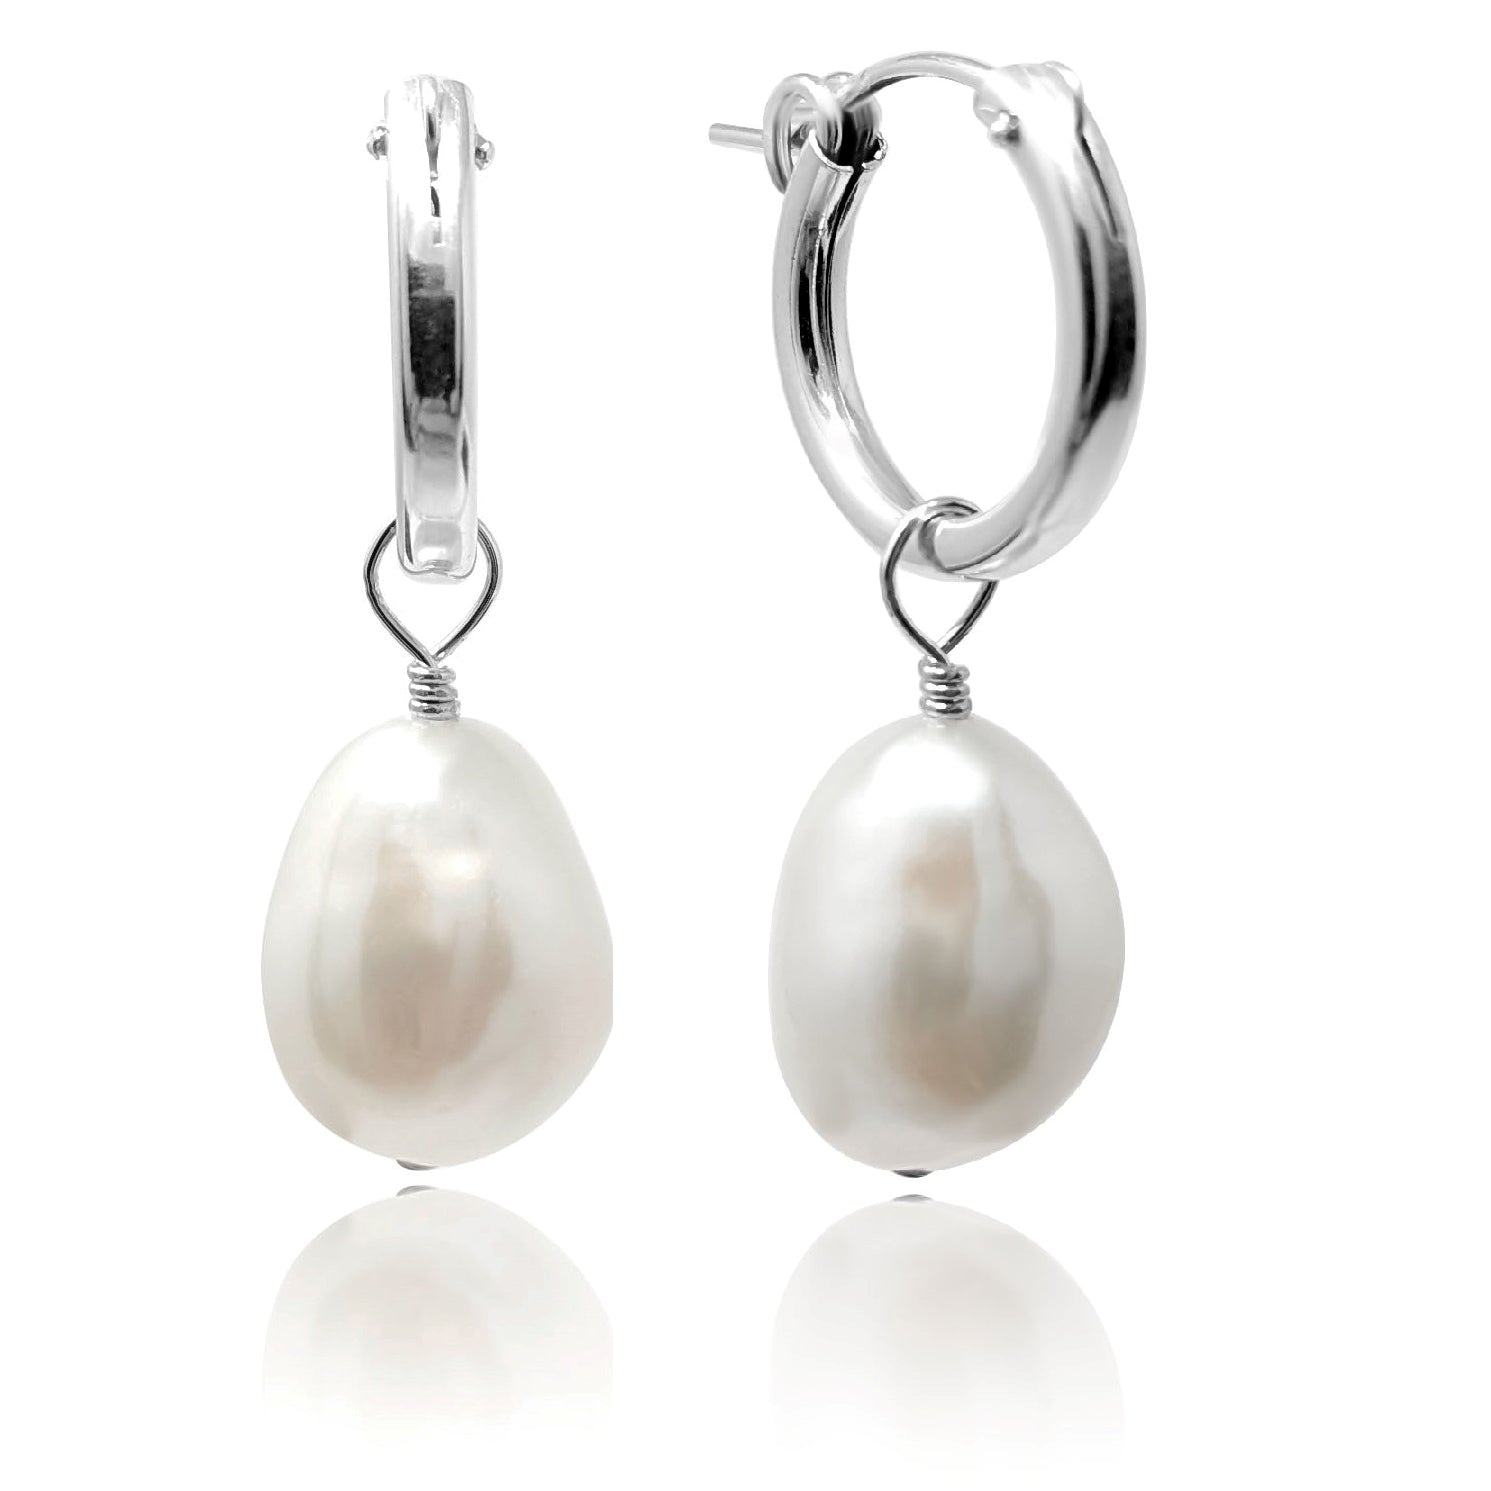 Silver hoop earring with baroque pearl pendant on white background